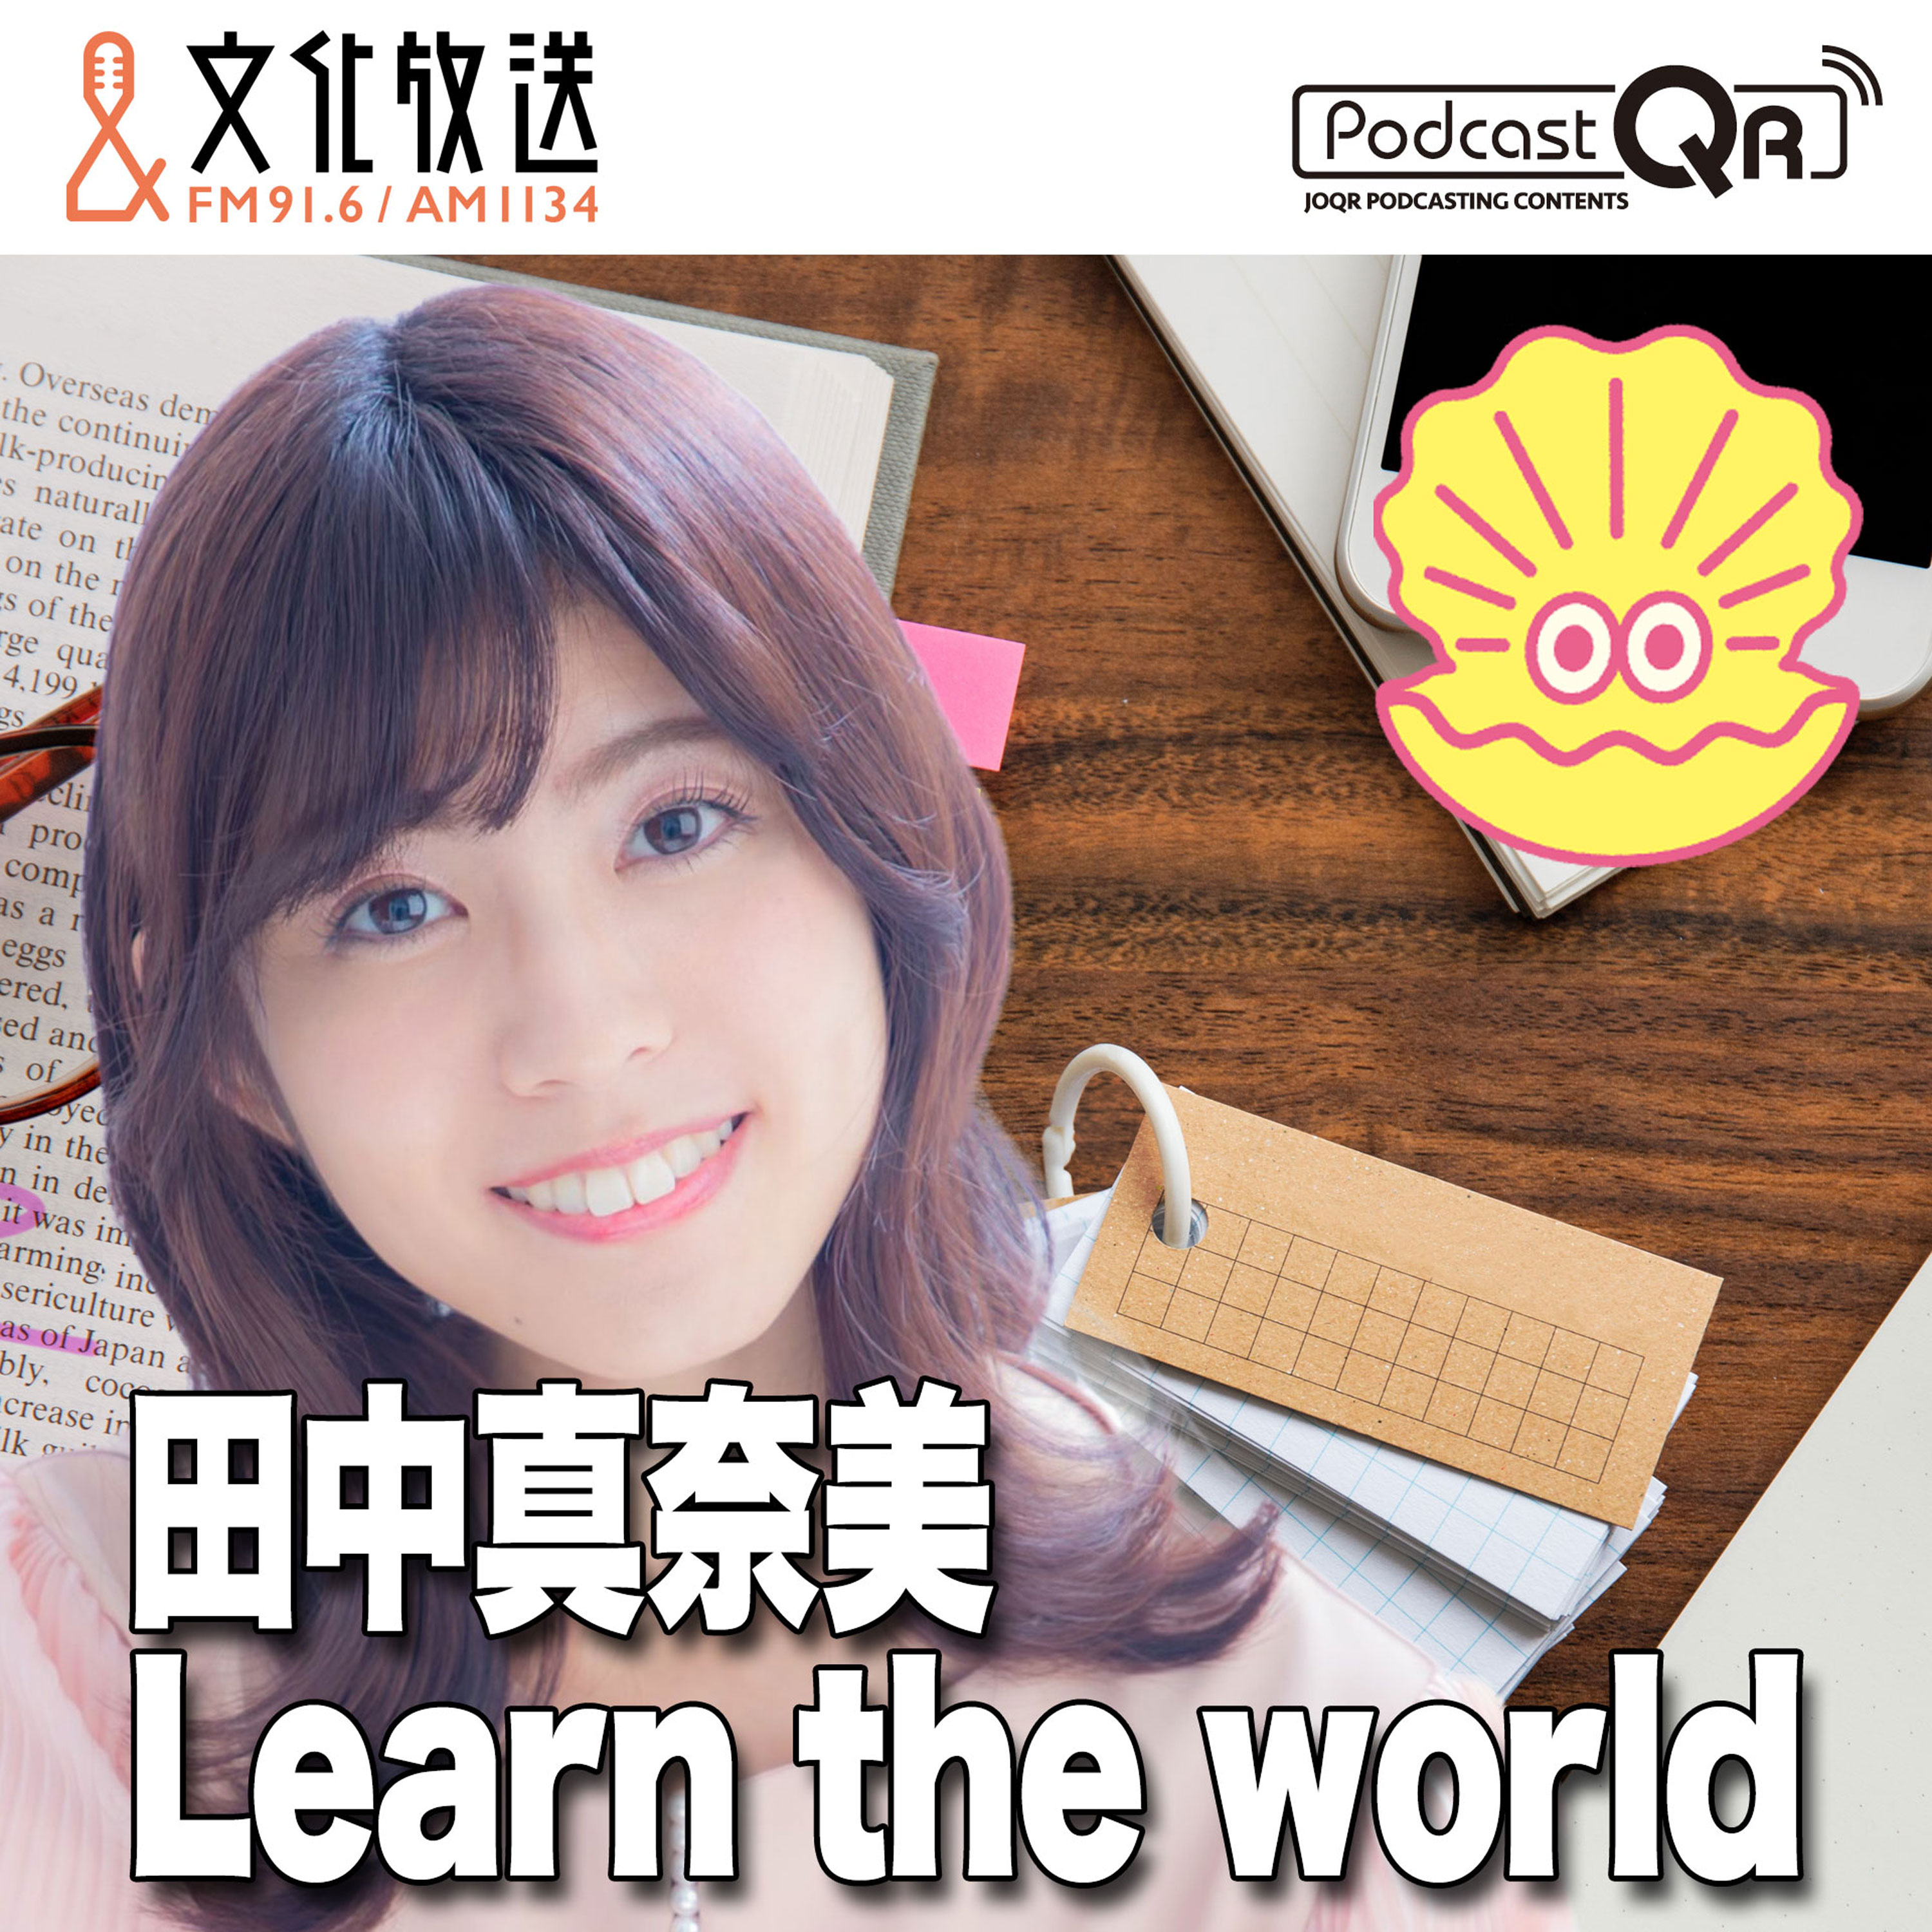 Episode 77(2022.9.30 part2):Manami Tanaka “Learn the world”